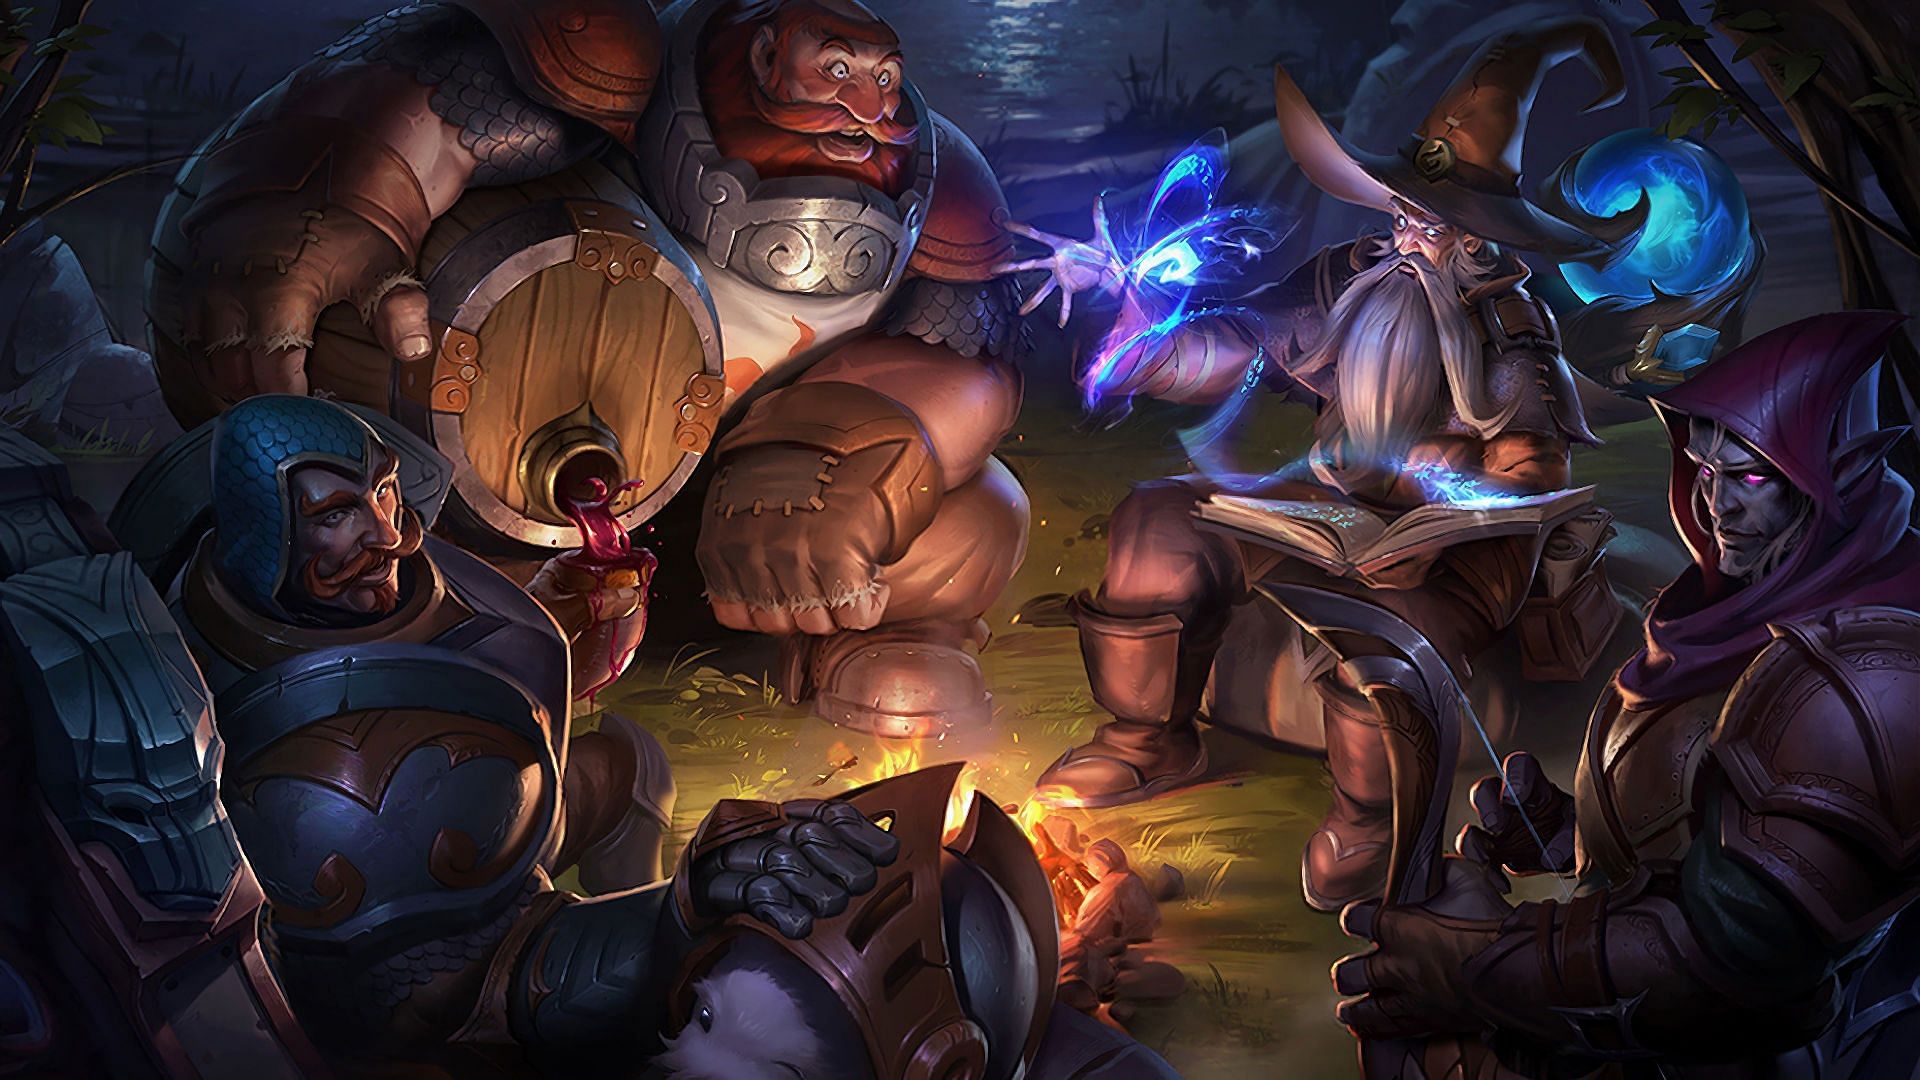 Pacific distrikt Dødelig League of Legends Skin sale: Price, featured champions, and more